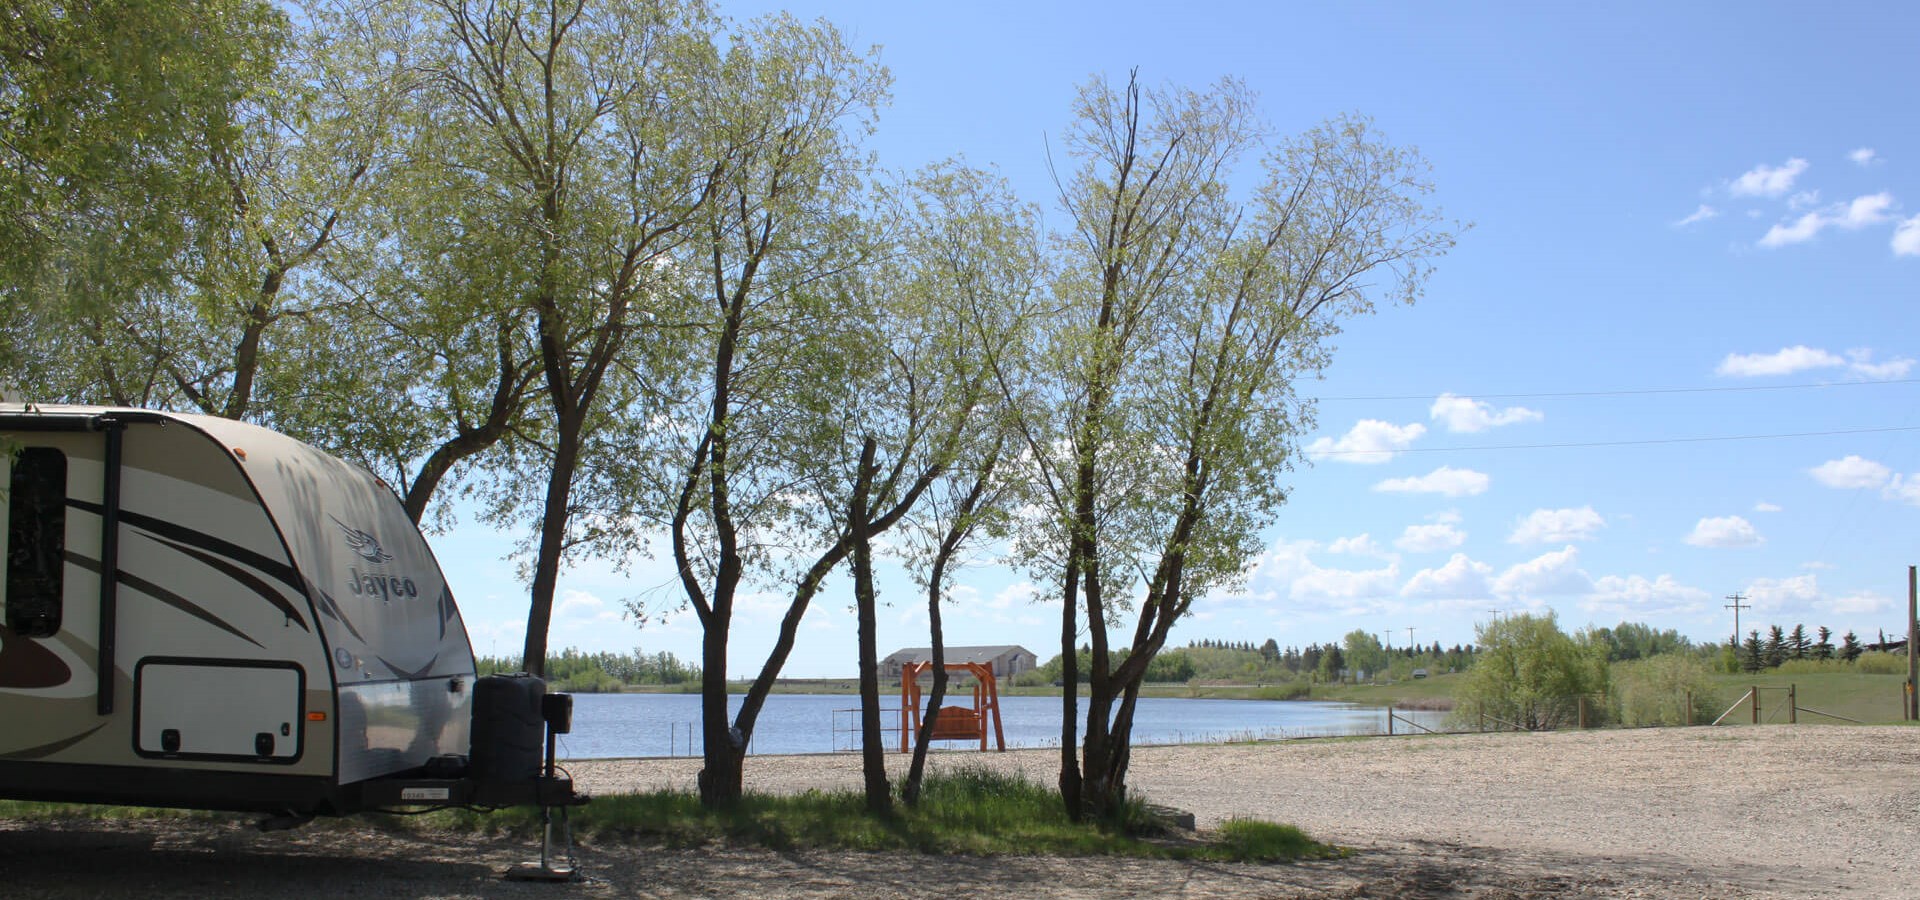 alberta campgrounds rv parks